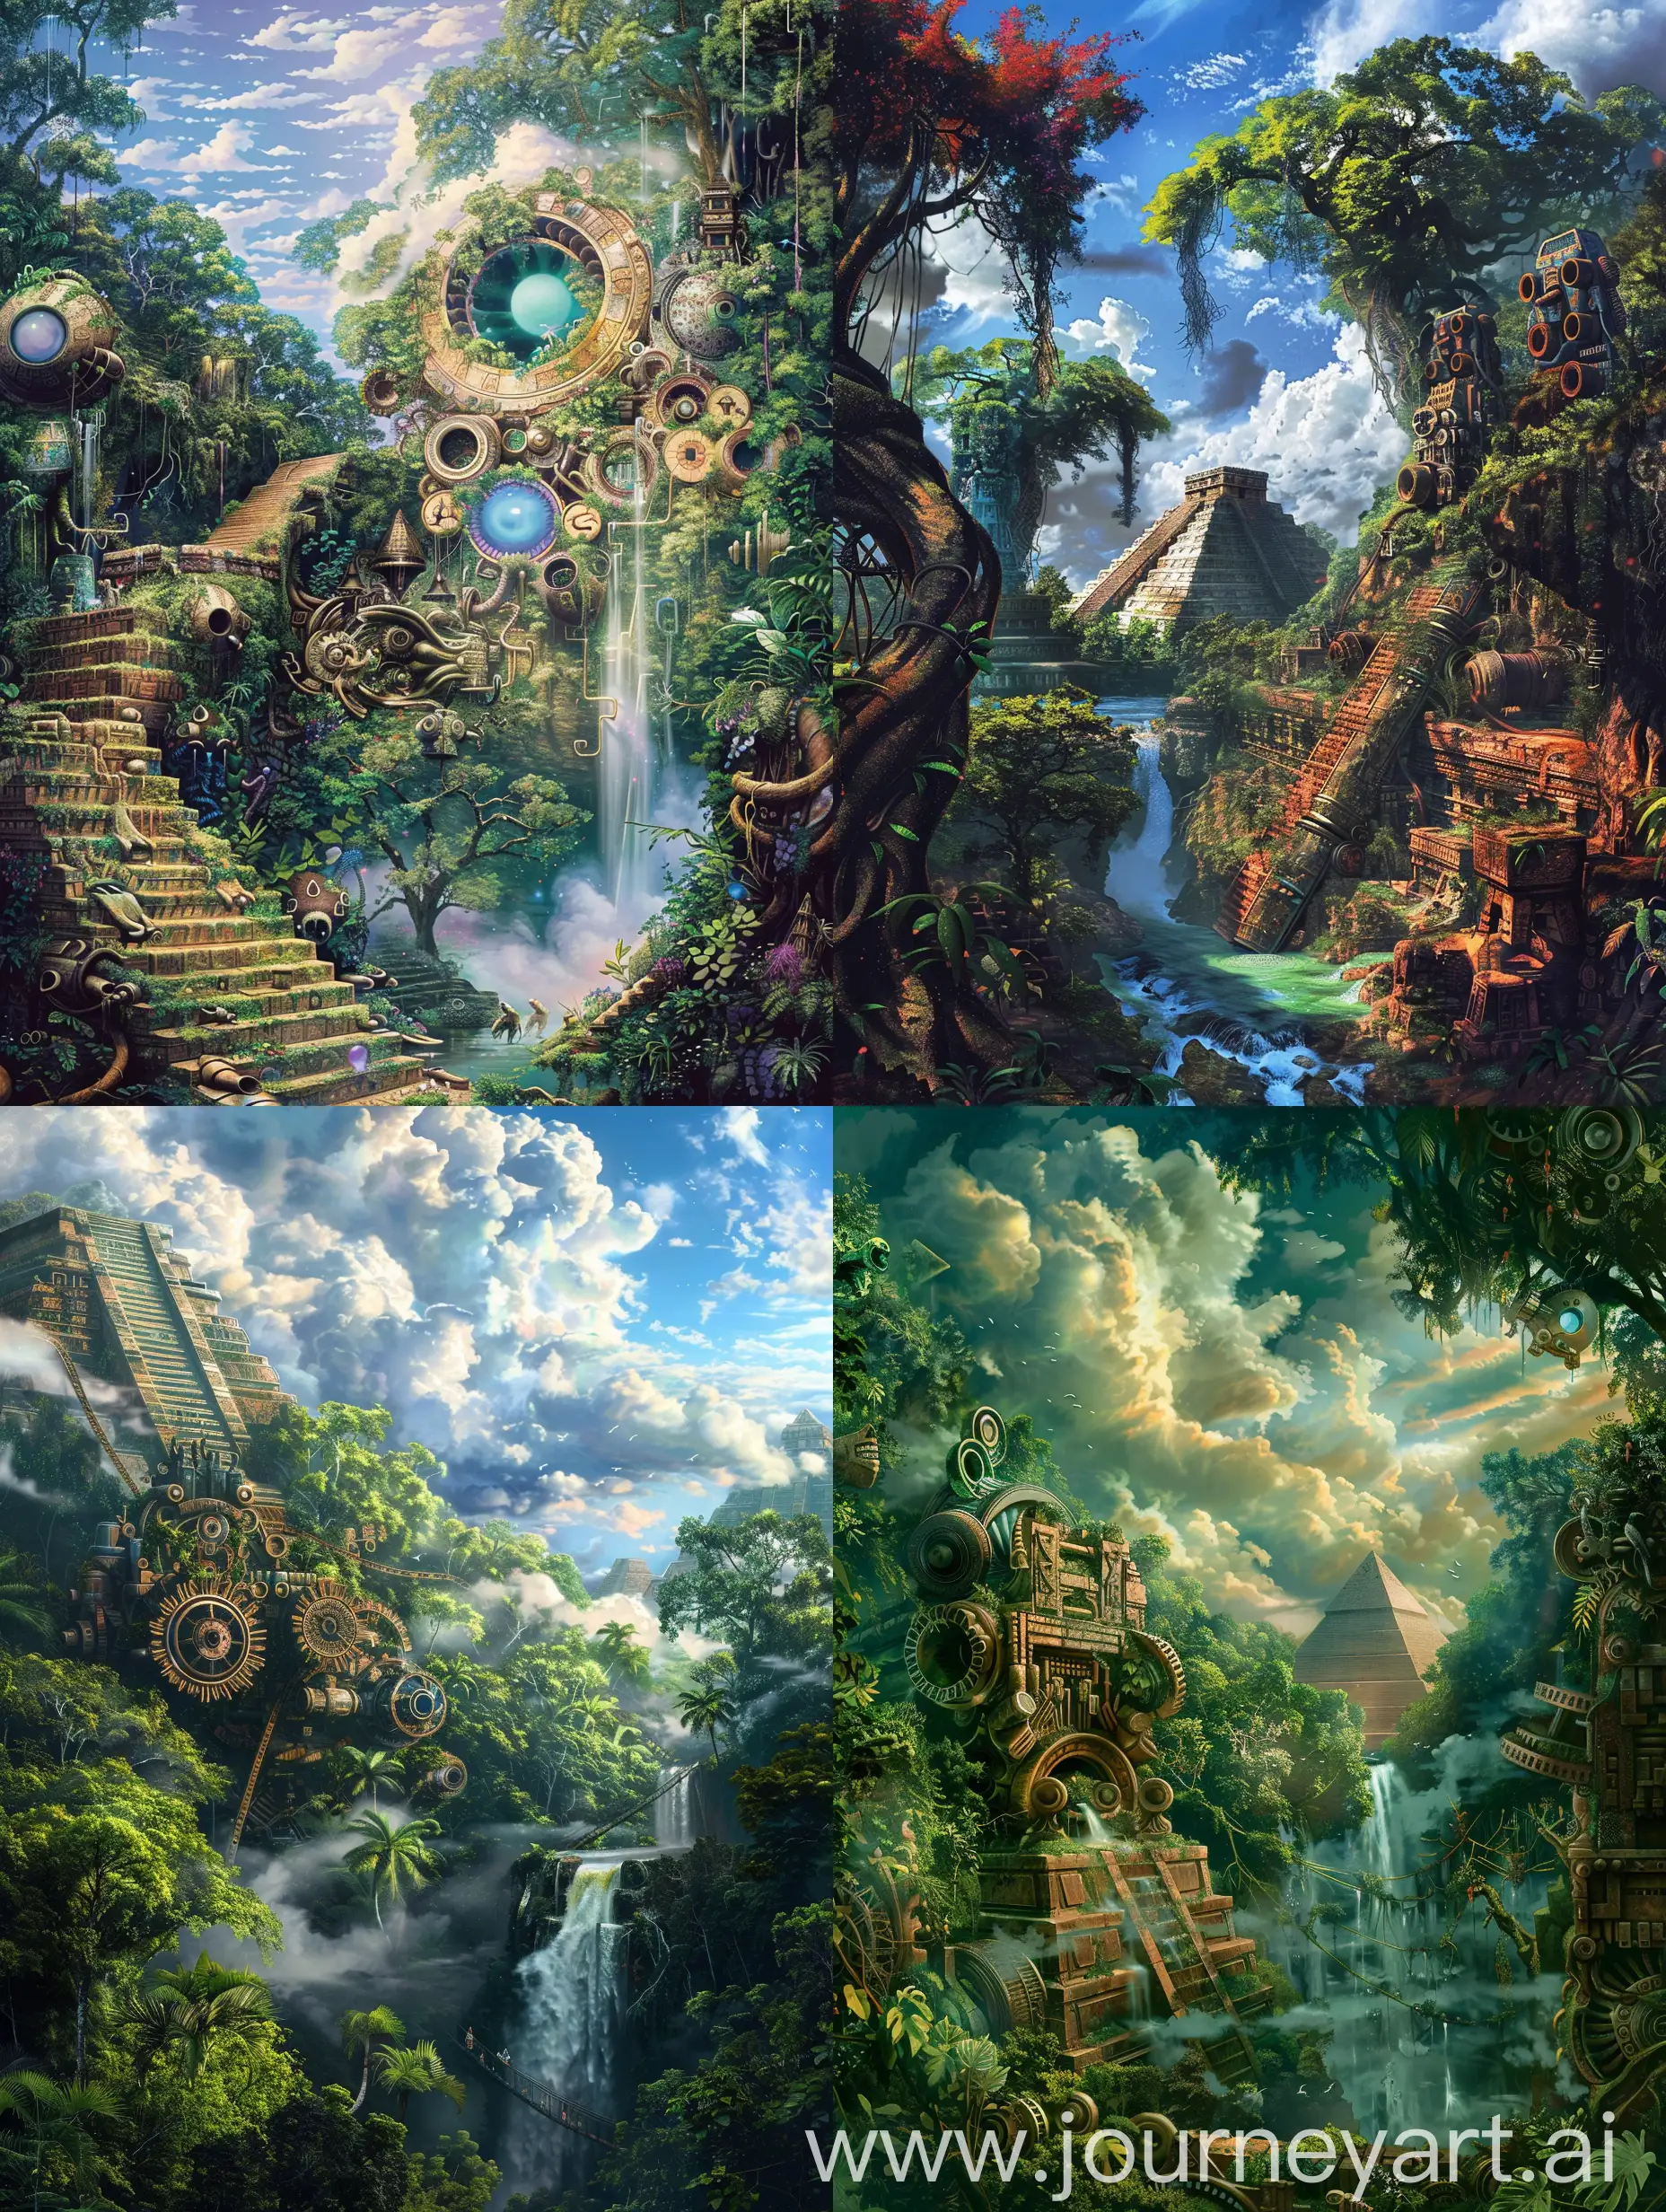 A psychedelic vision of the forest with clouds pyramids engine parts water fall aliens creatures humans in highest detail, vivid color with gorgeous, Mayan setting